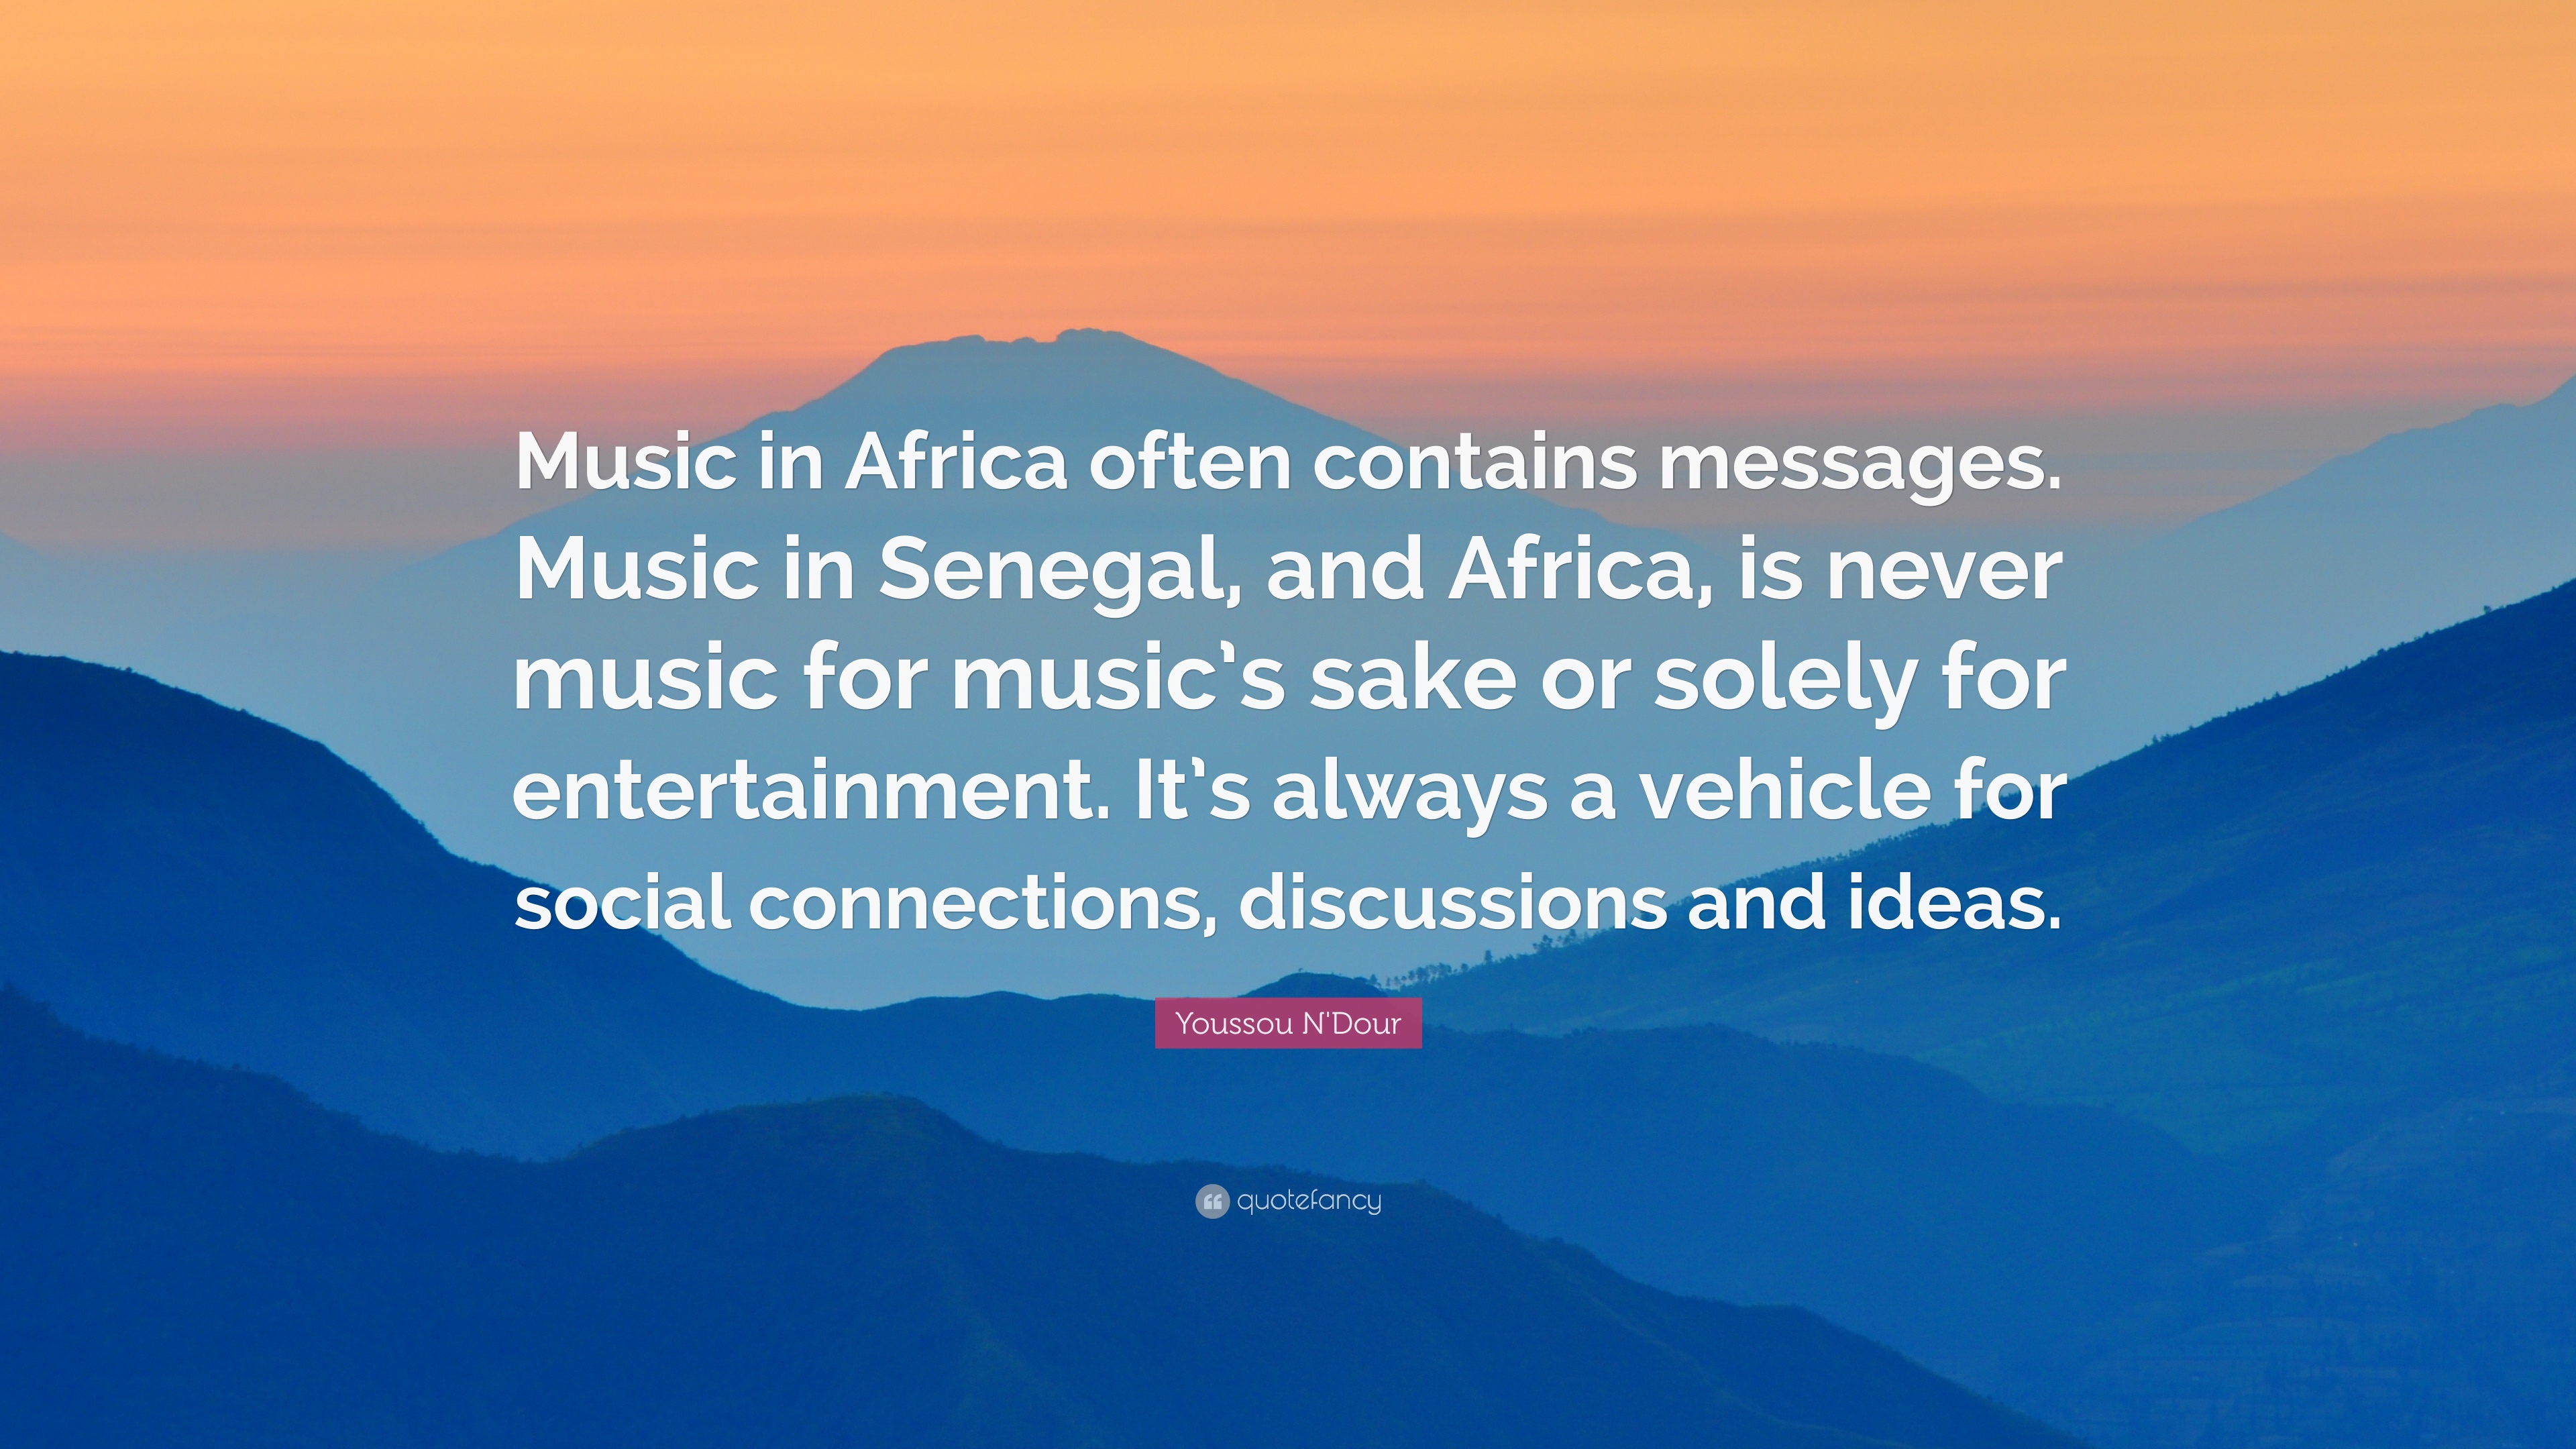 Youssou N'Dour Quote: “Music in Africa often contains messages